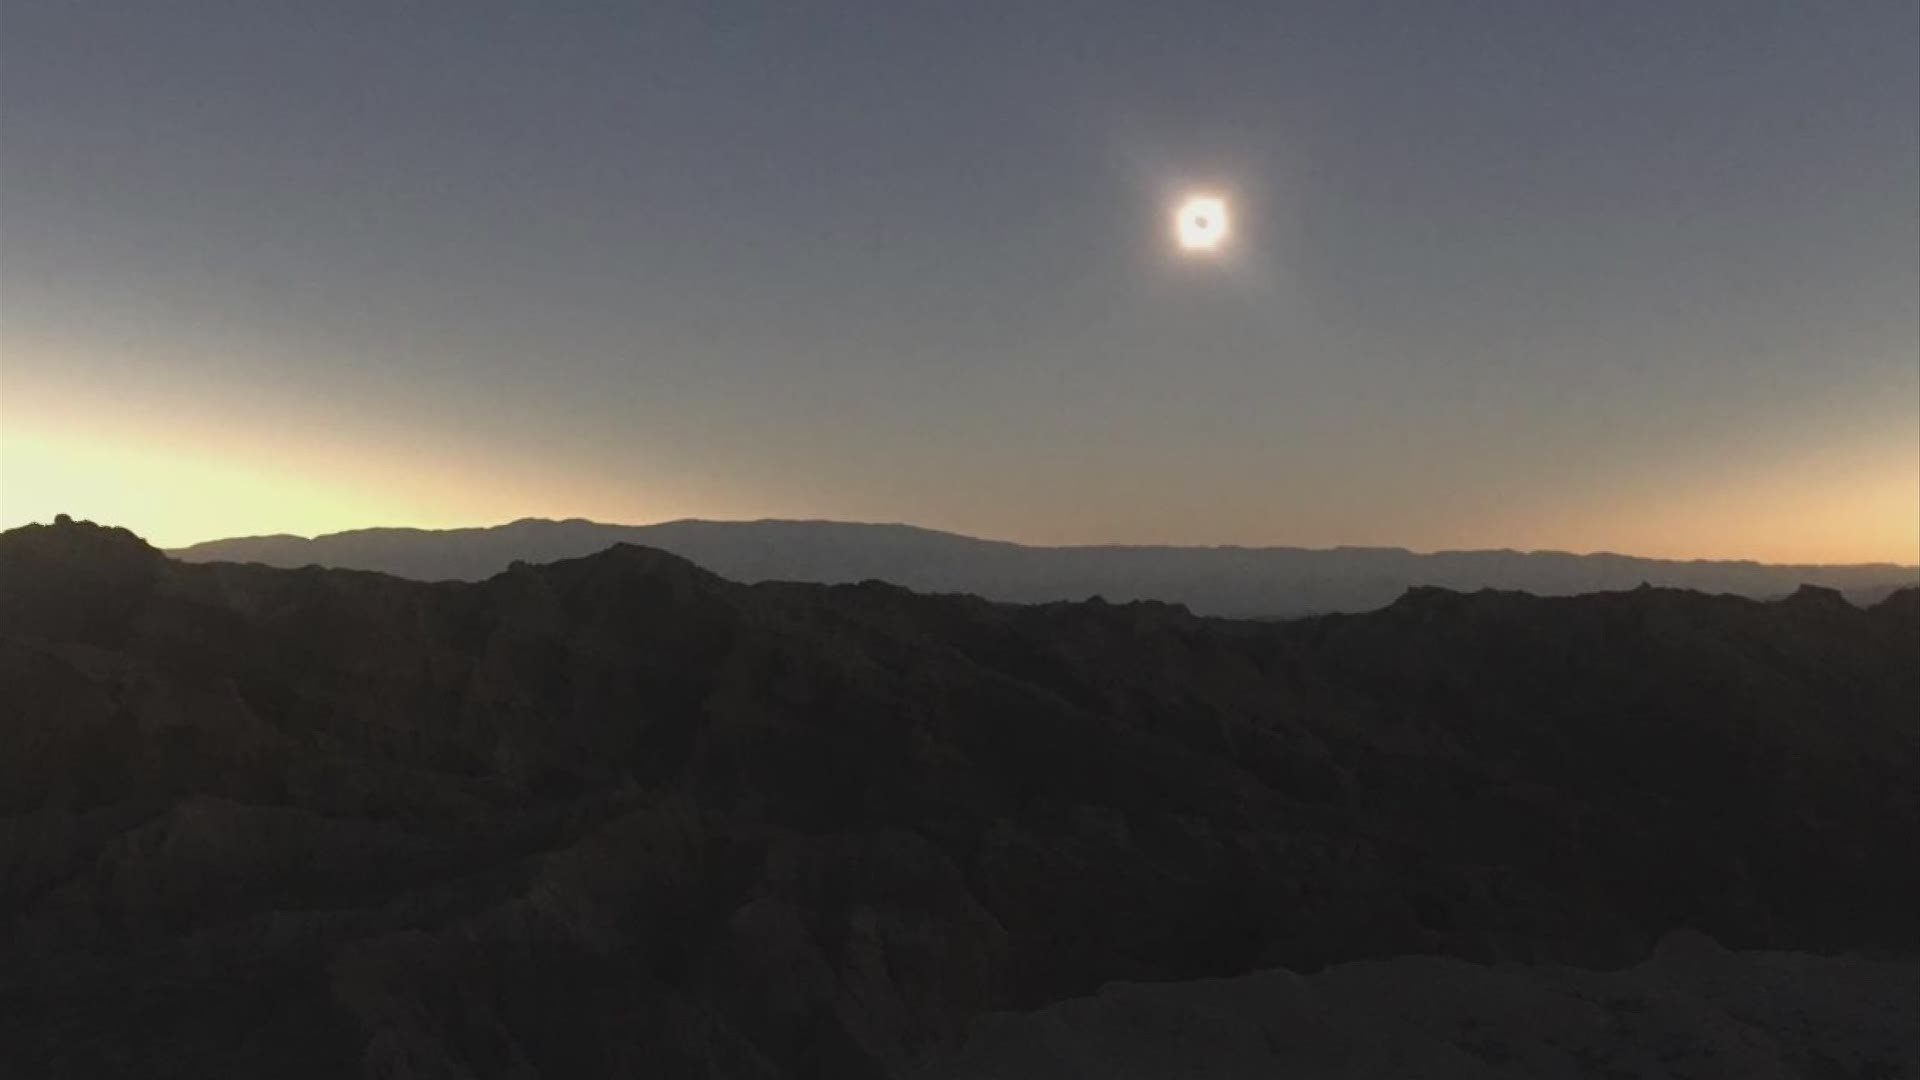 Bring out the solar eclipse glasses for the “ring of fire” solar eclipse Thursday morning.